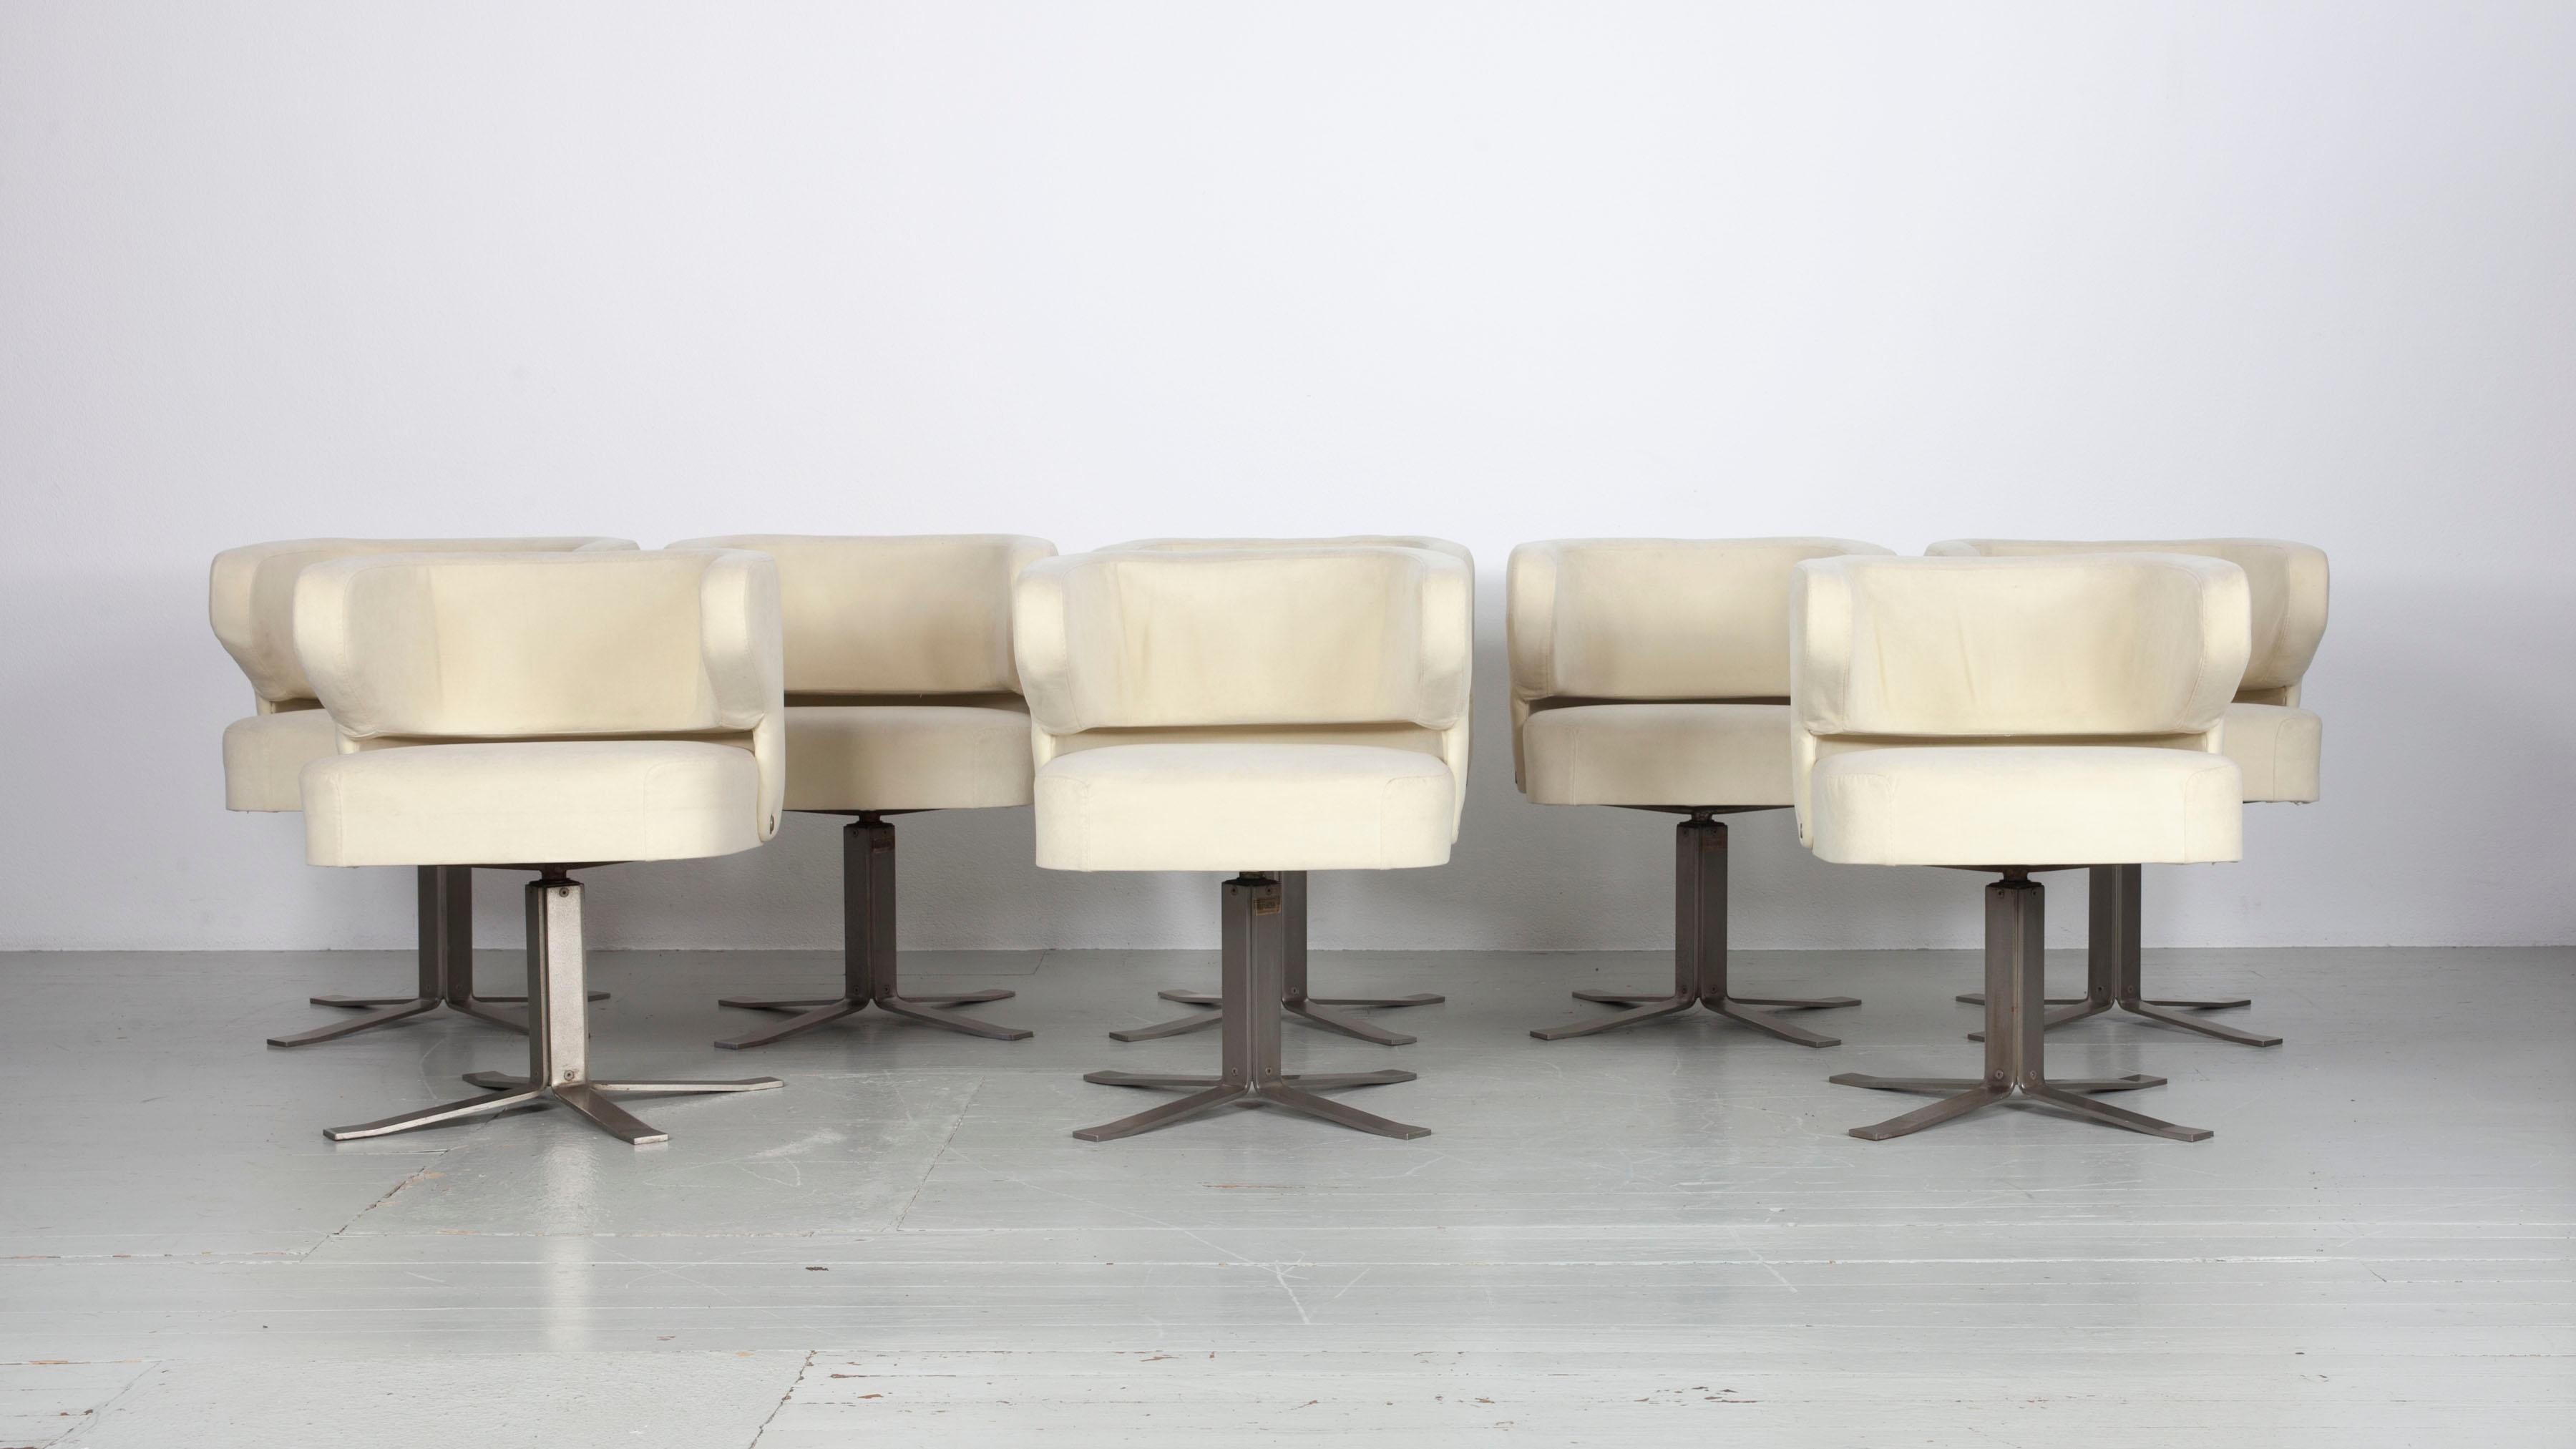 This Italian set of eight swivel chairs dates from the 1970s, it is the model Poney. The chairs were designed by Giulio Moscatelli and manufactured by Formanova. The chairs are covered with beige fabric, which is in good condition except for a few